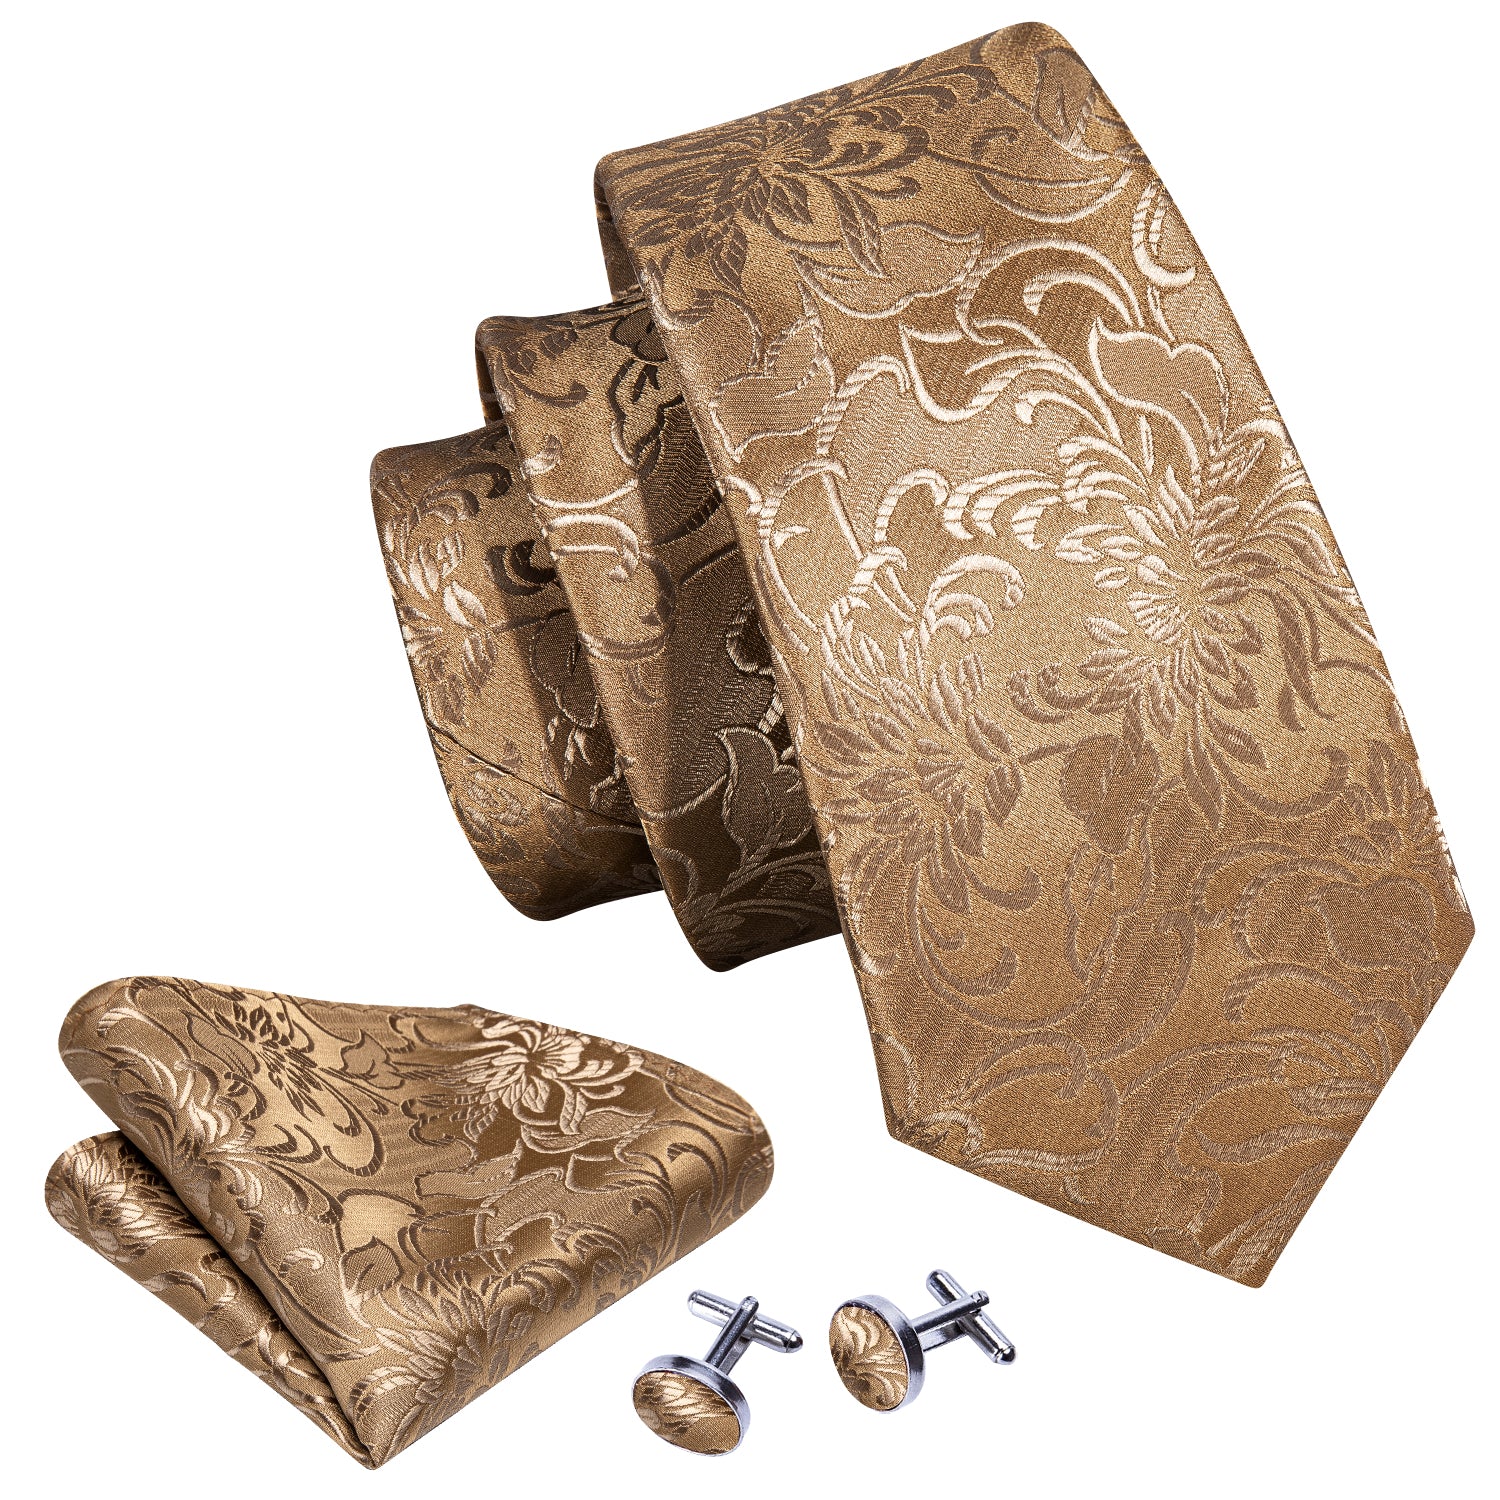 Barry.wang Champagne Tie Gold Floral Tie Pocket Square Cufflinks Set